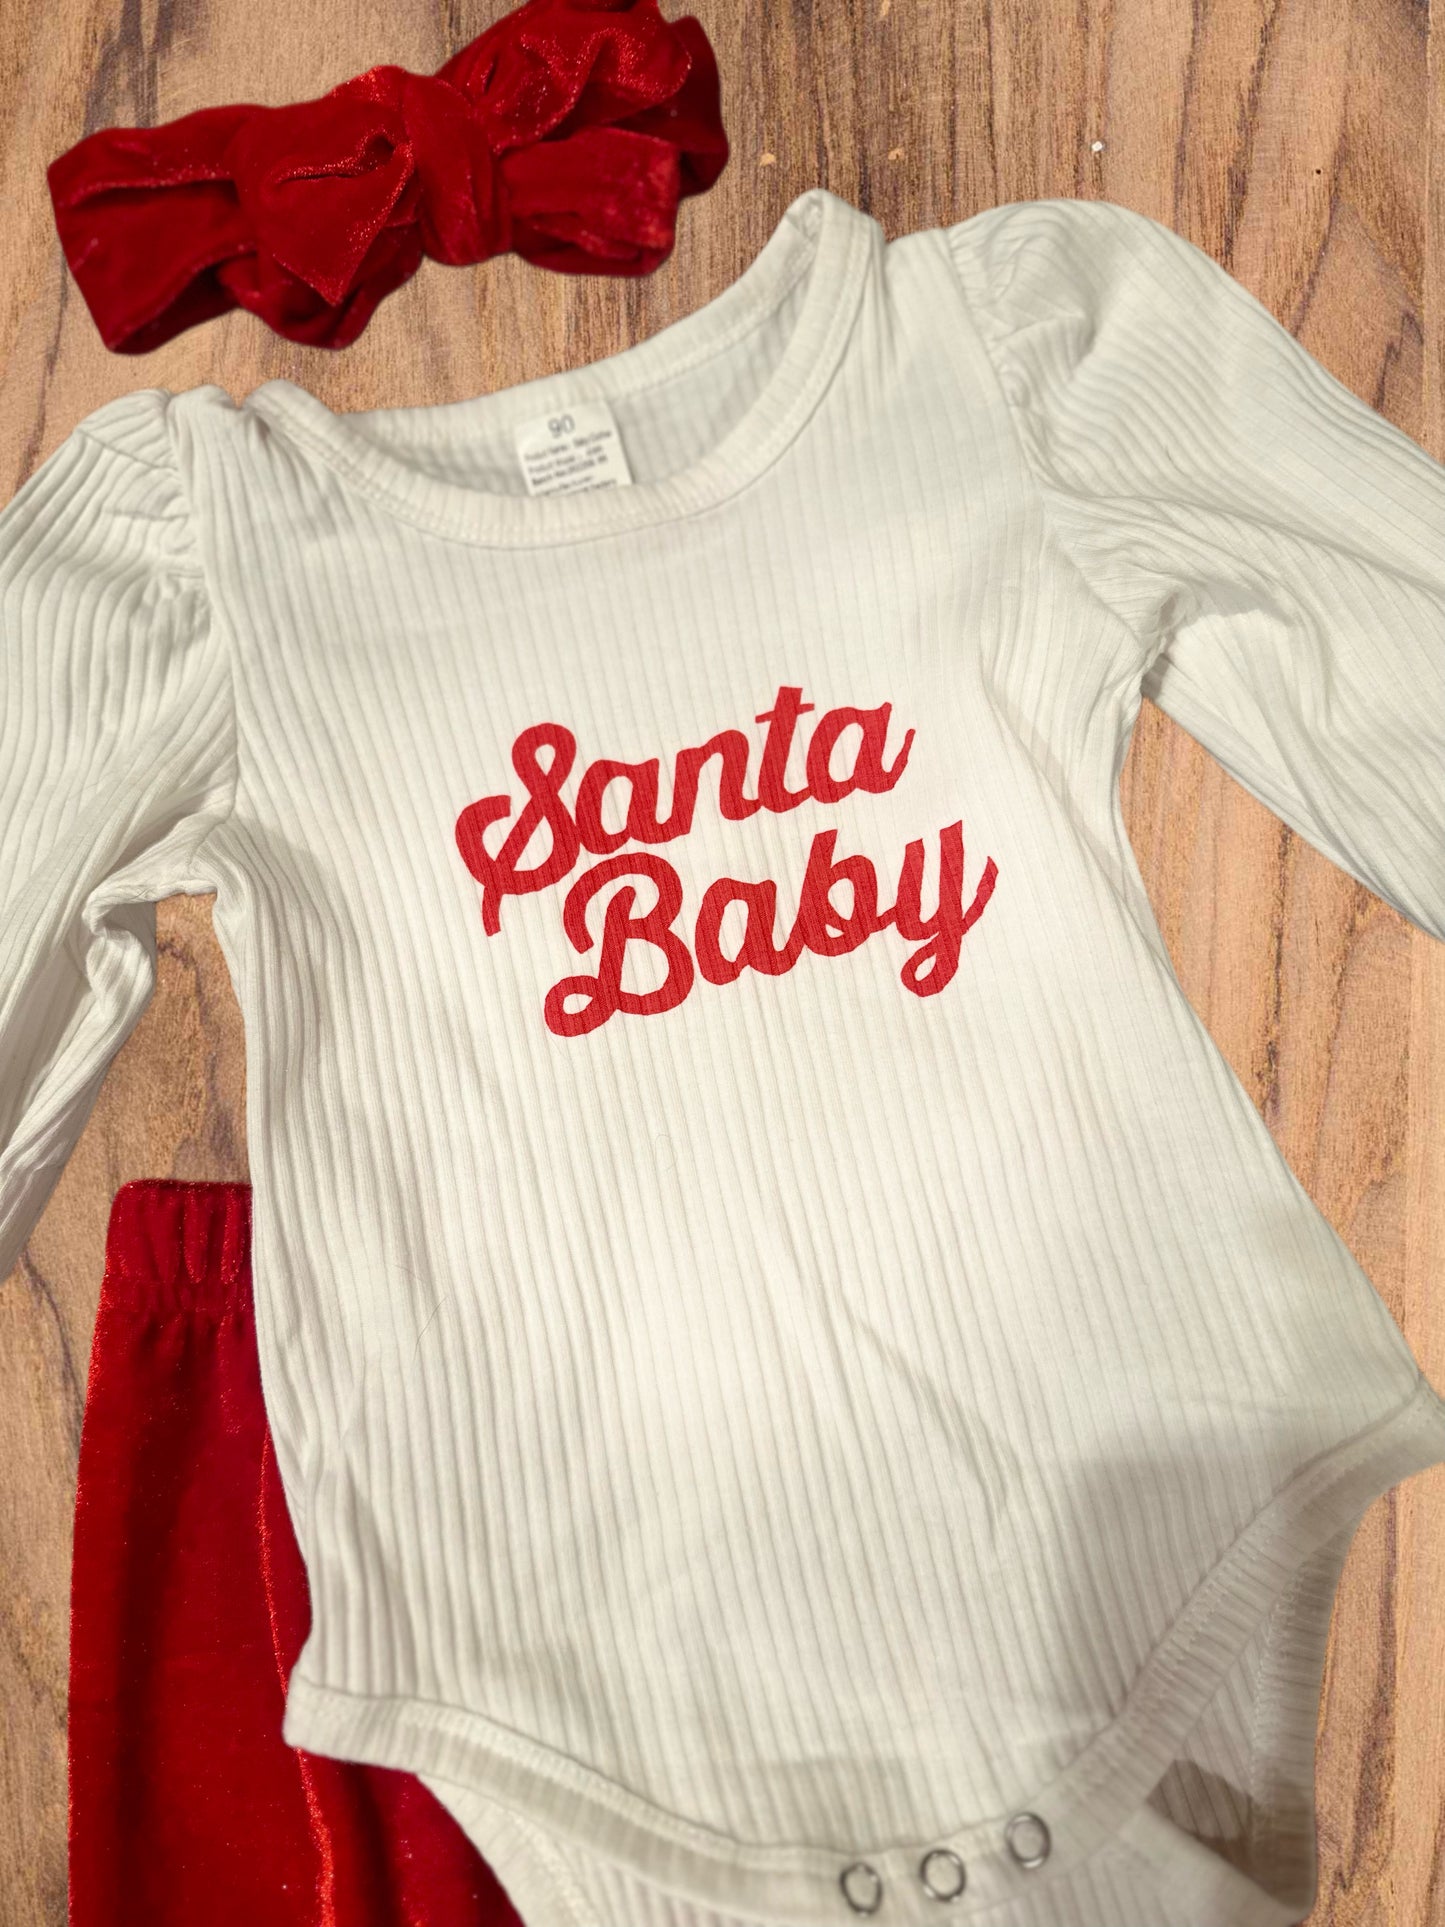 Santa Baby 3 Piece Outfit